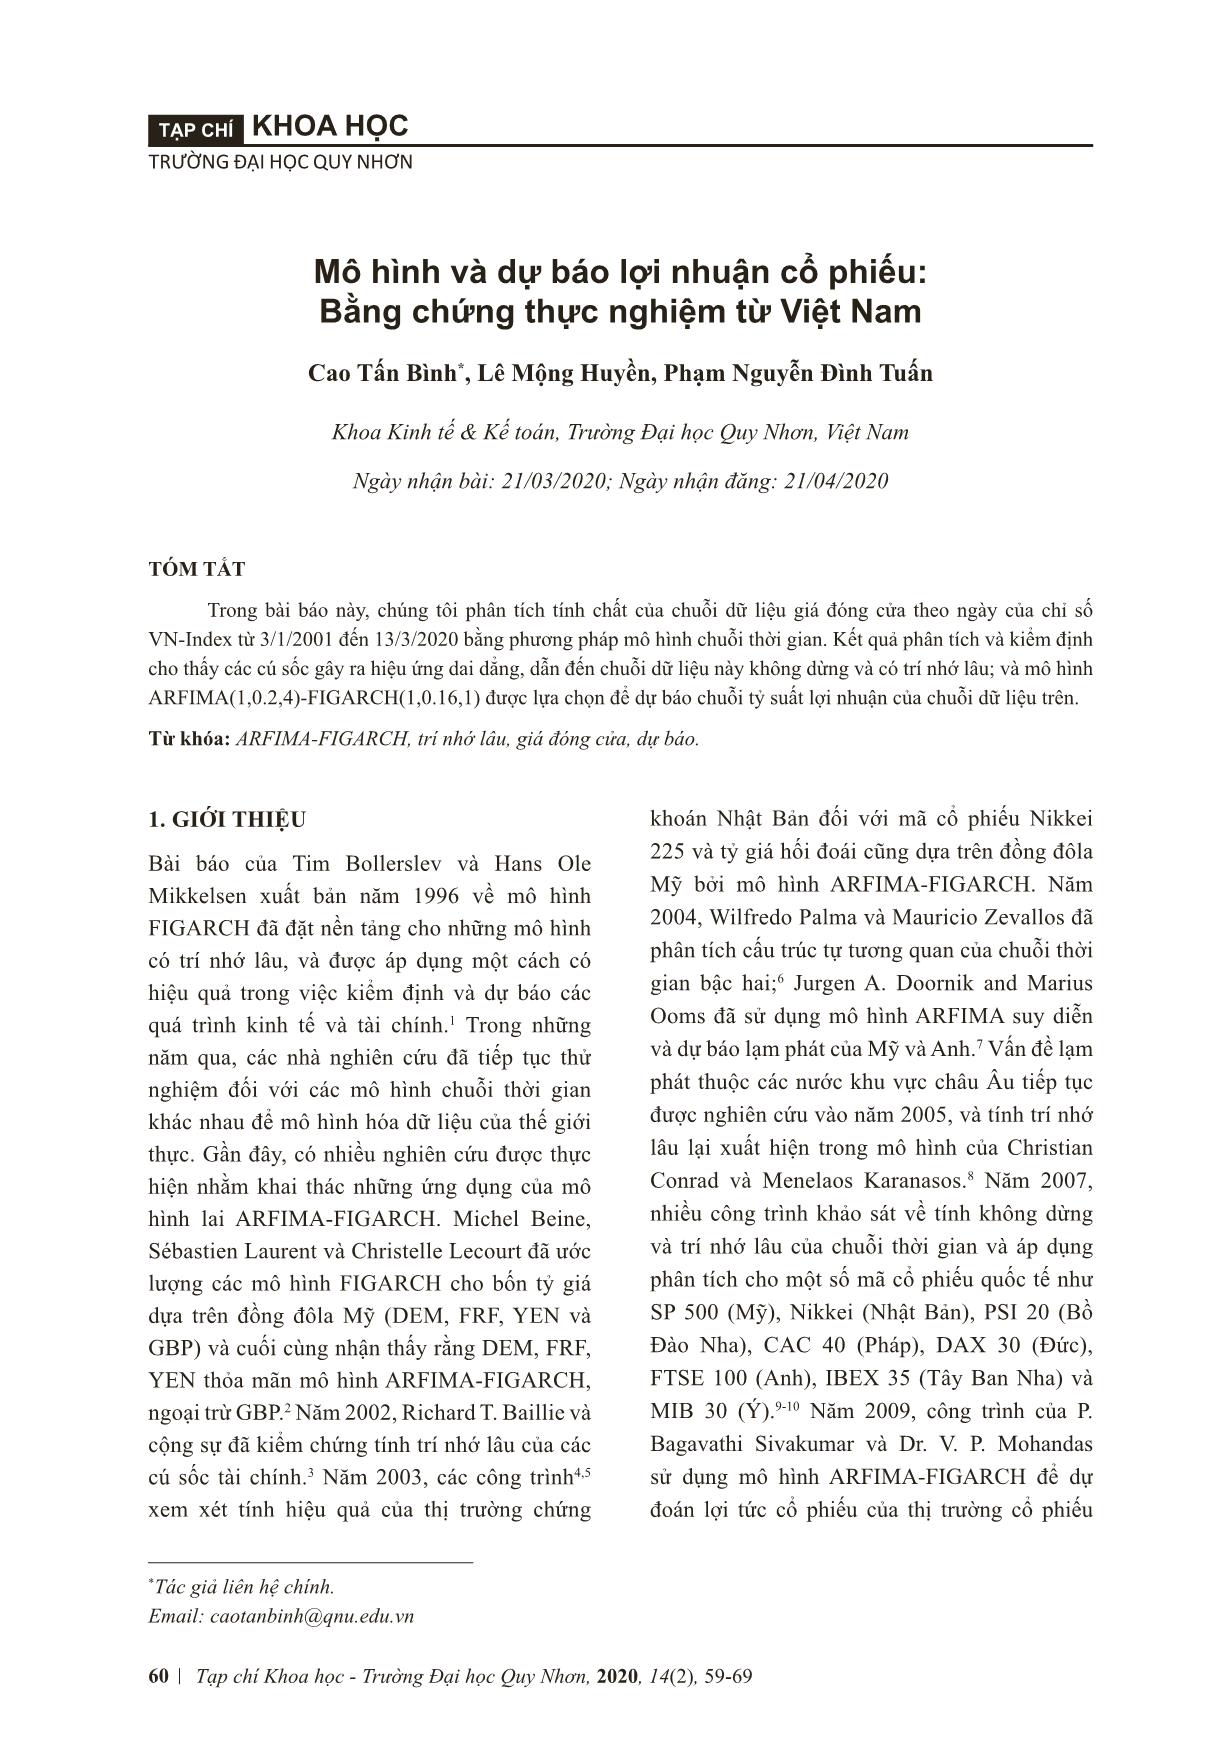 Modelling and predicting stock returns: Empirical evidence from Vietnam trang 2